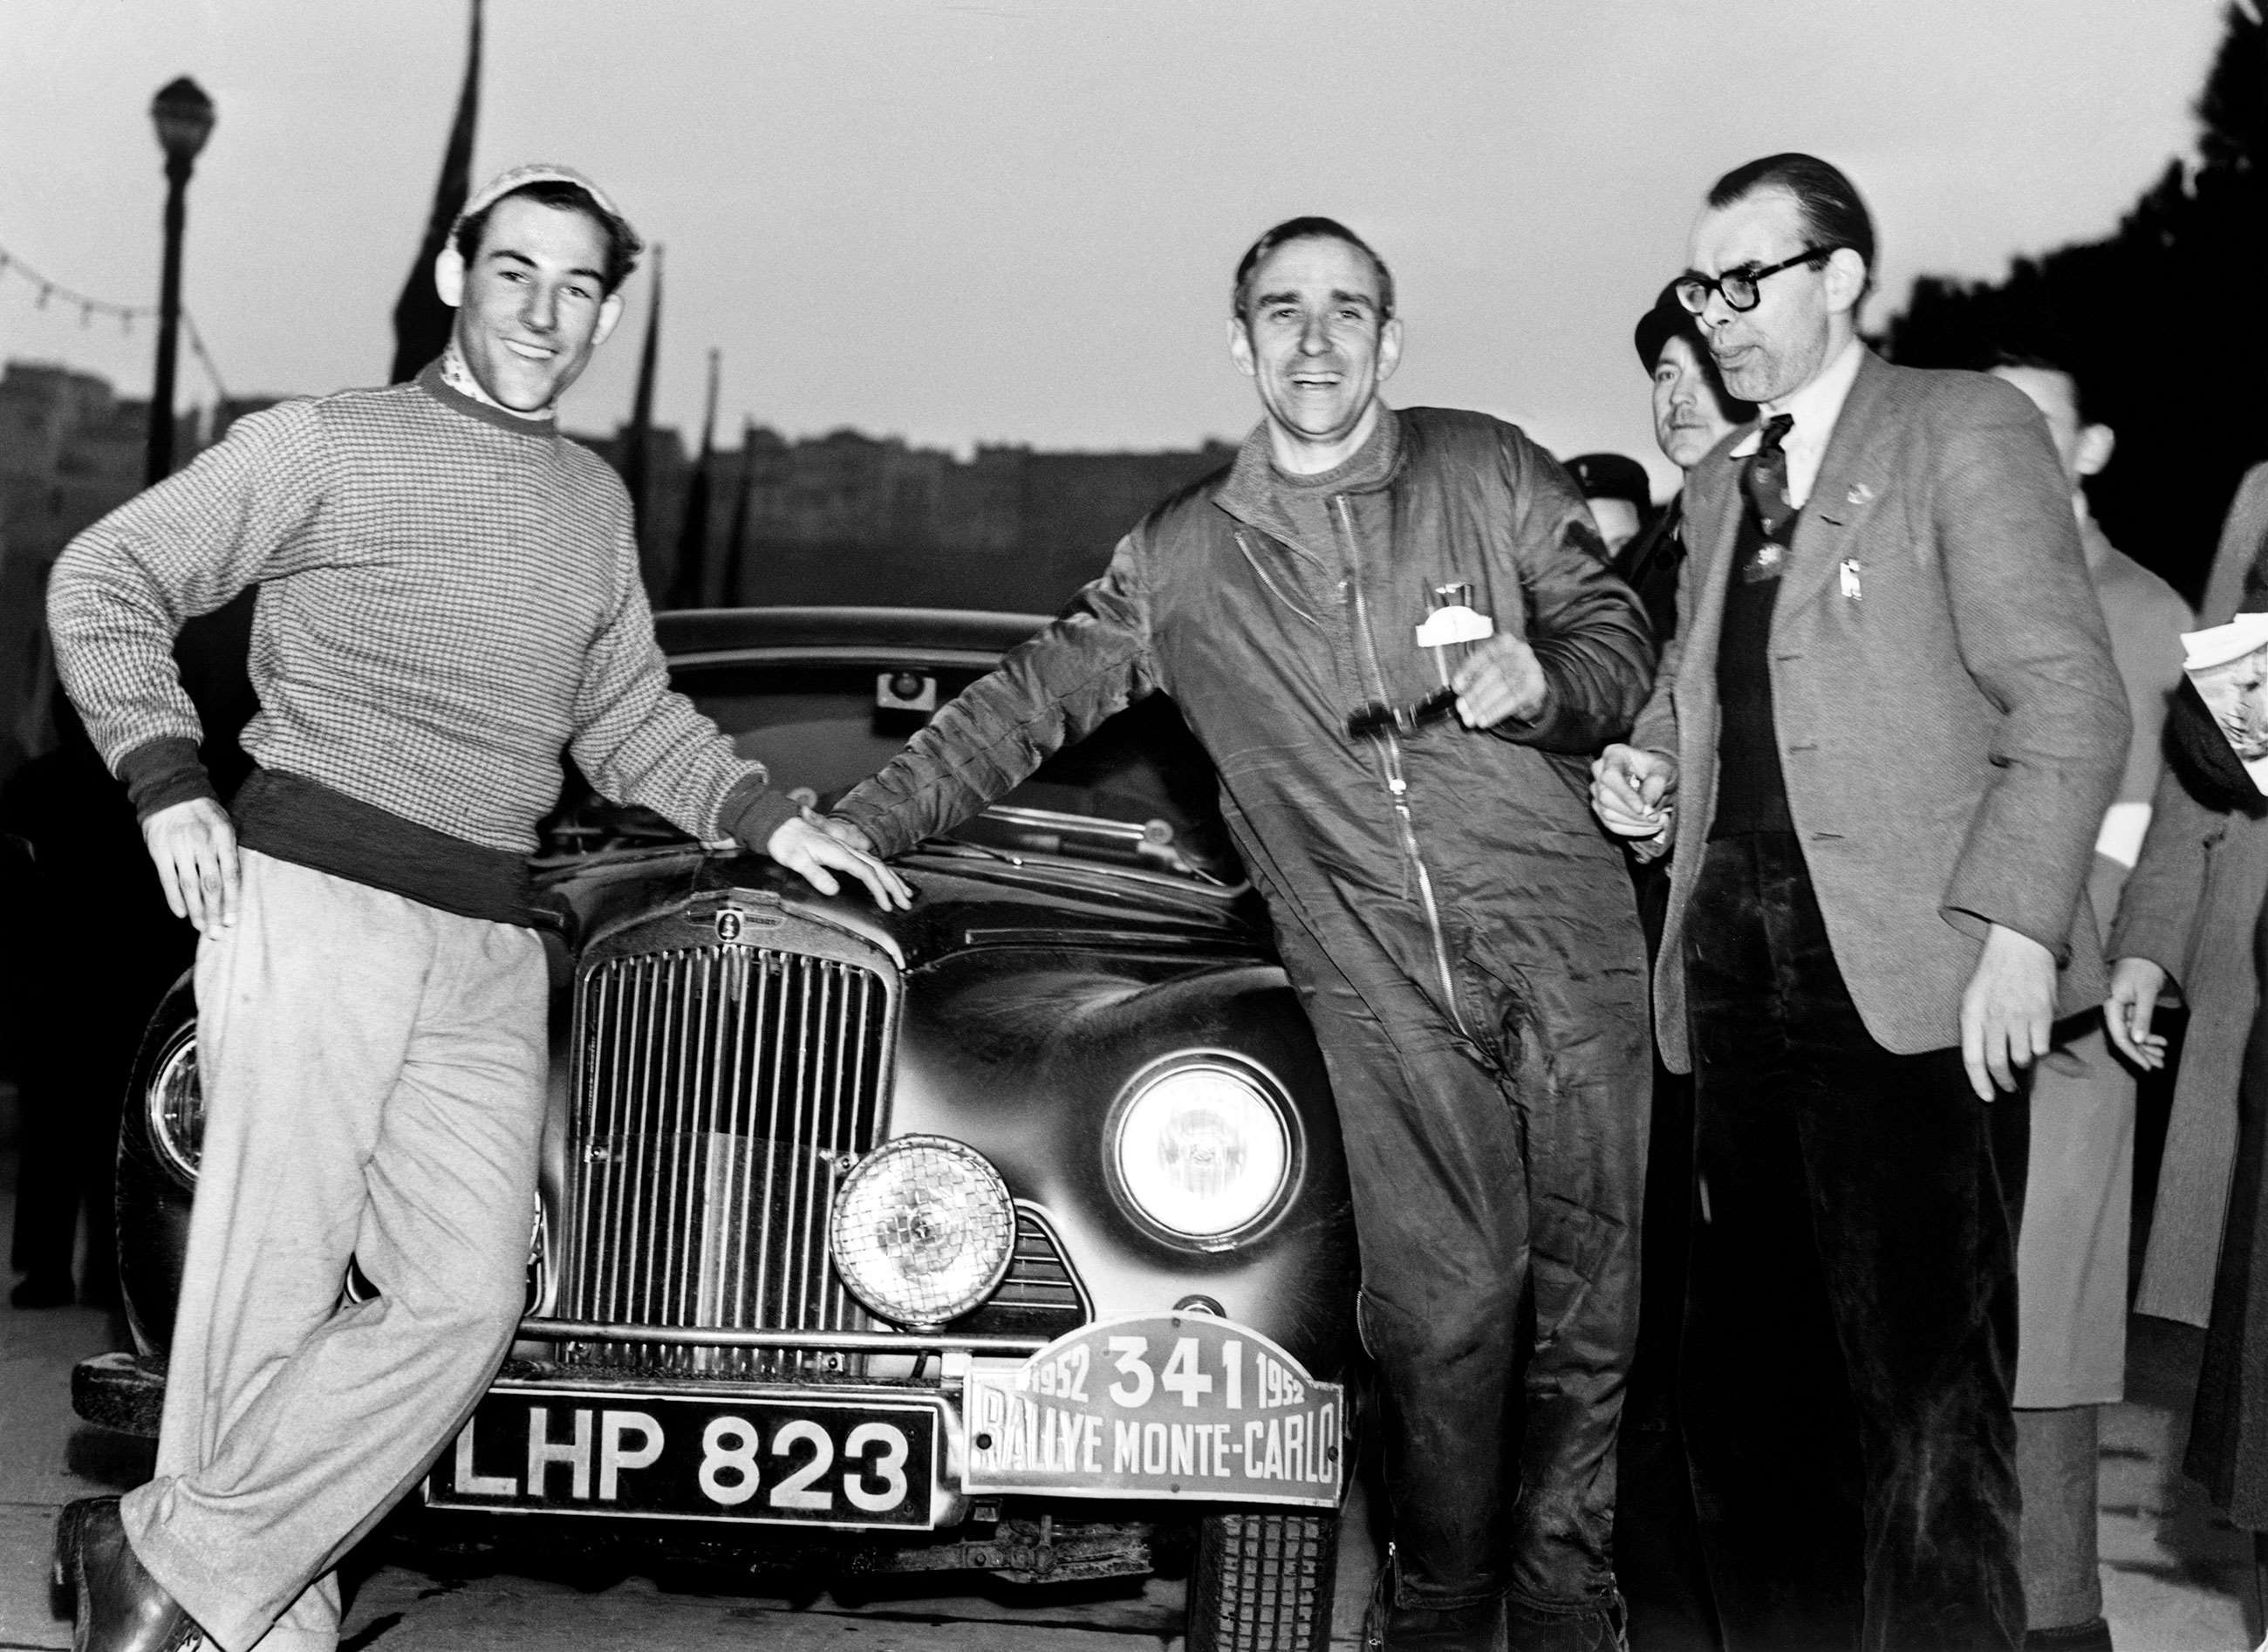 Stirling Moss, Autocar's John Cooper and BRDC Secretary Desmond Scannell with a Sunbeam Talbot 90 at the Monte Carlo Rally, 1952.